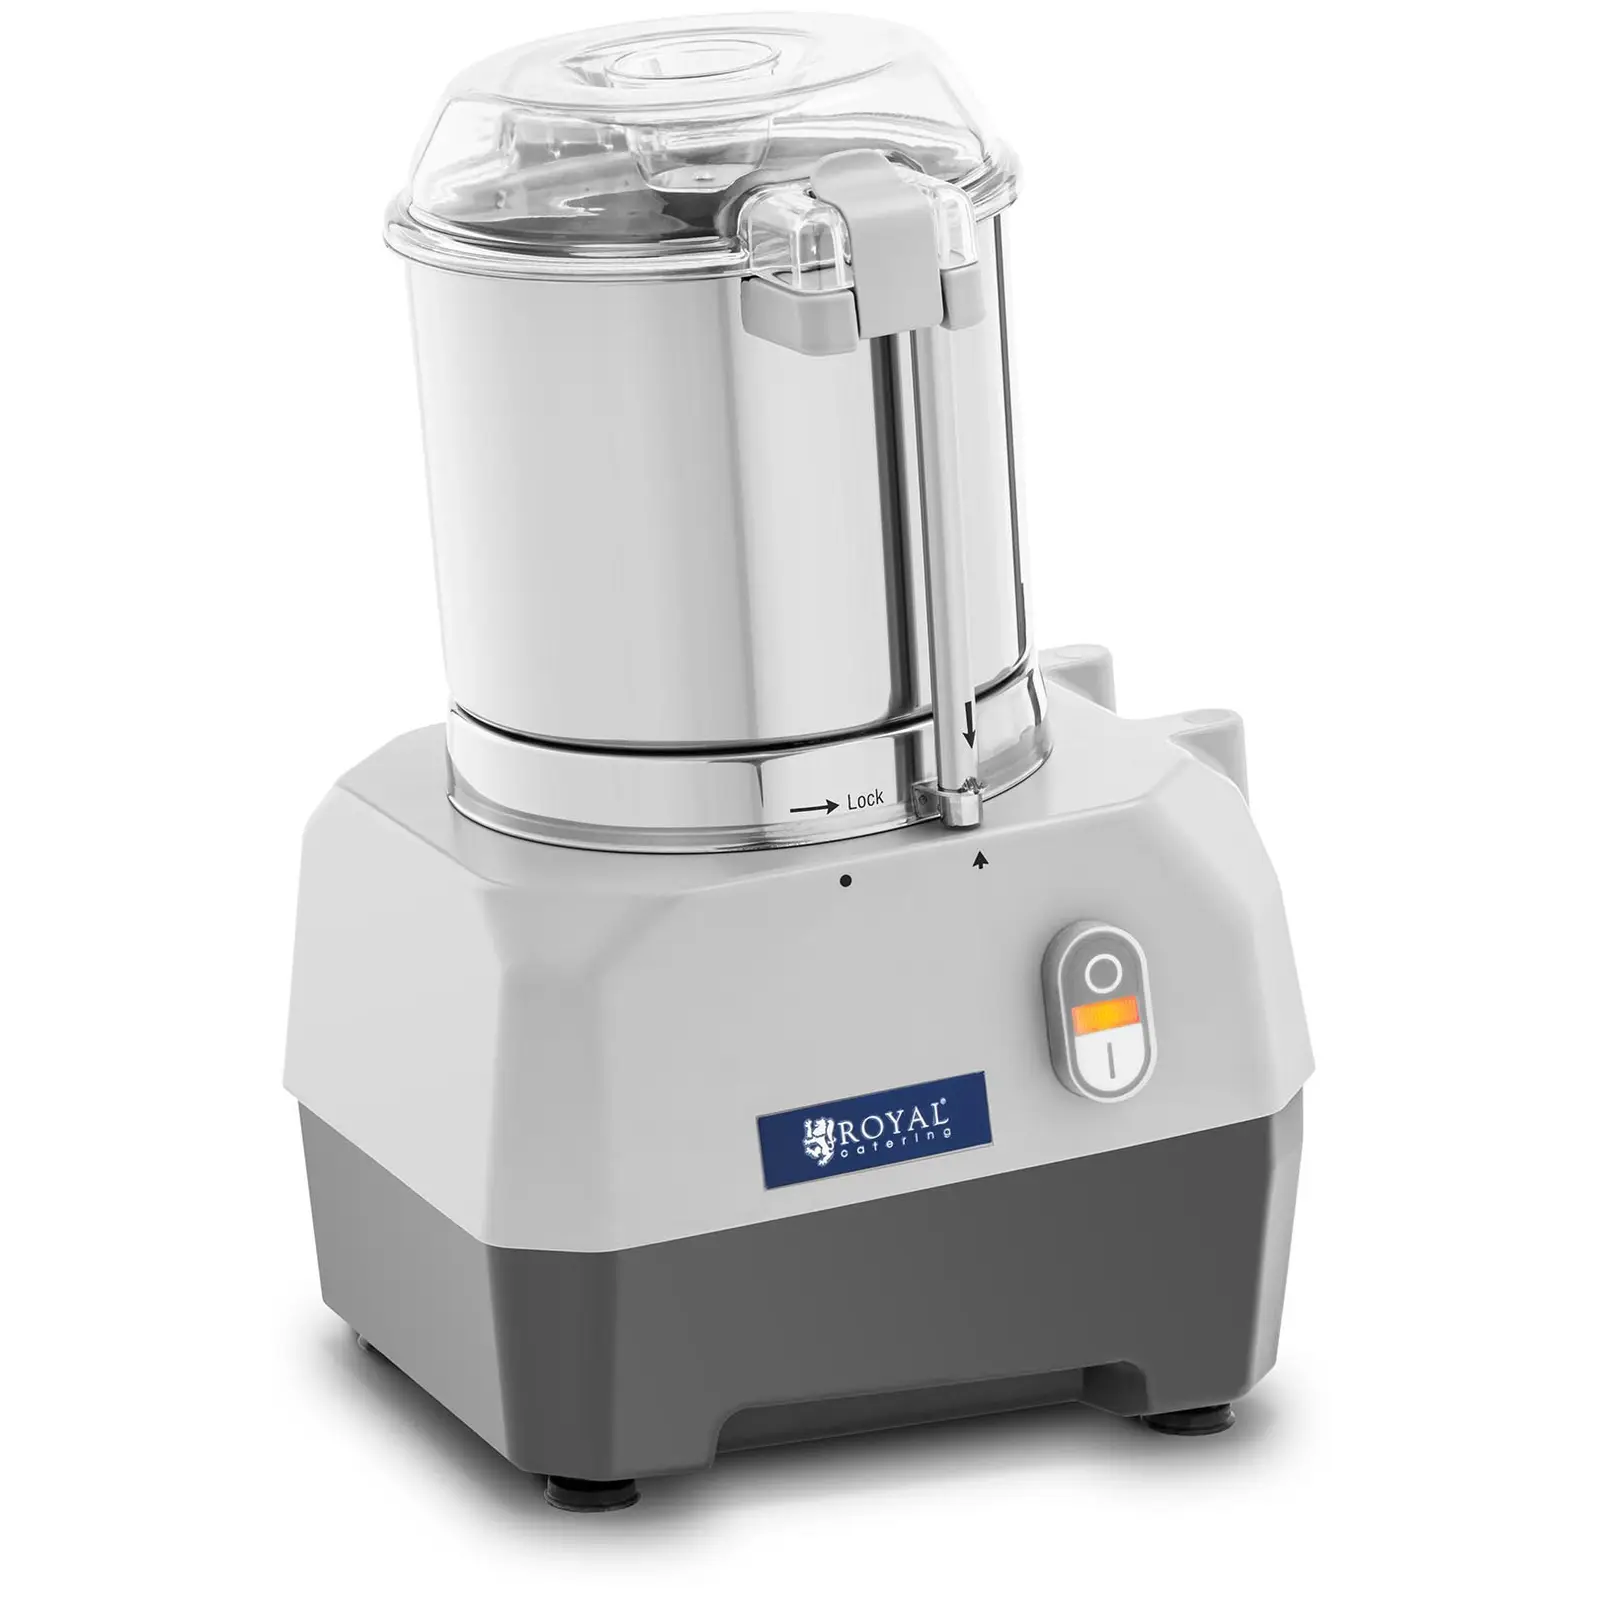 Foodprosessor - 1500 rpm - 5 L - Royal Catering